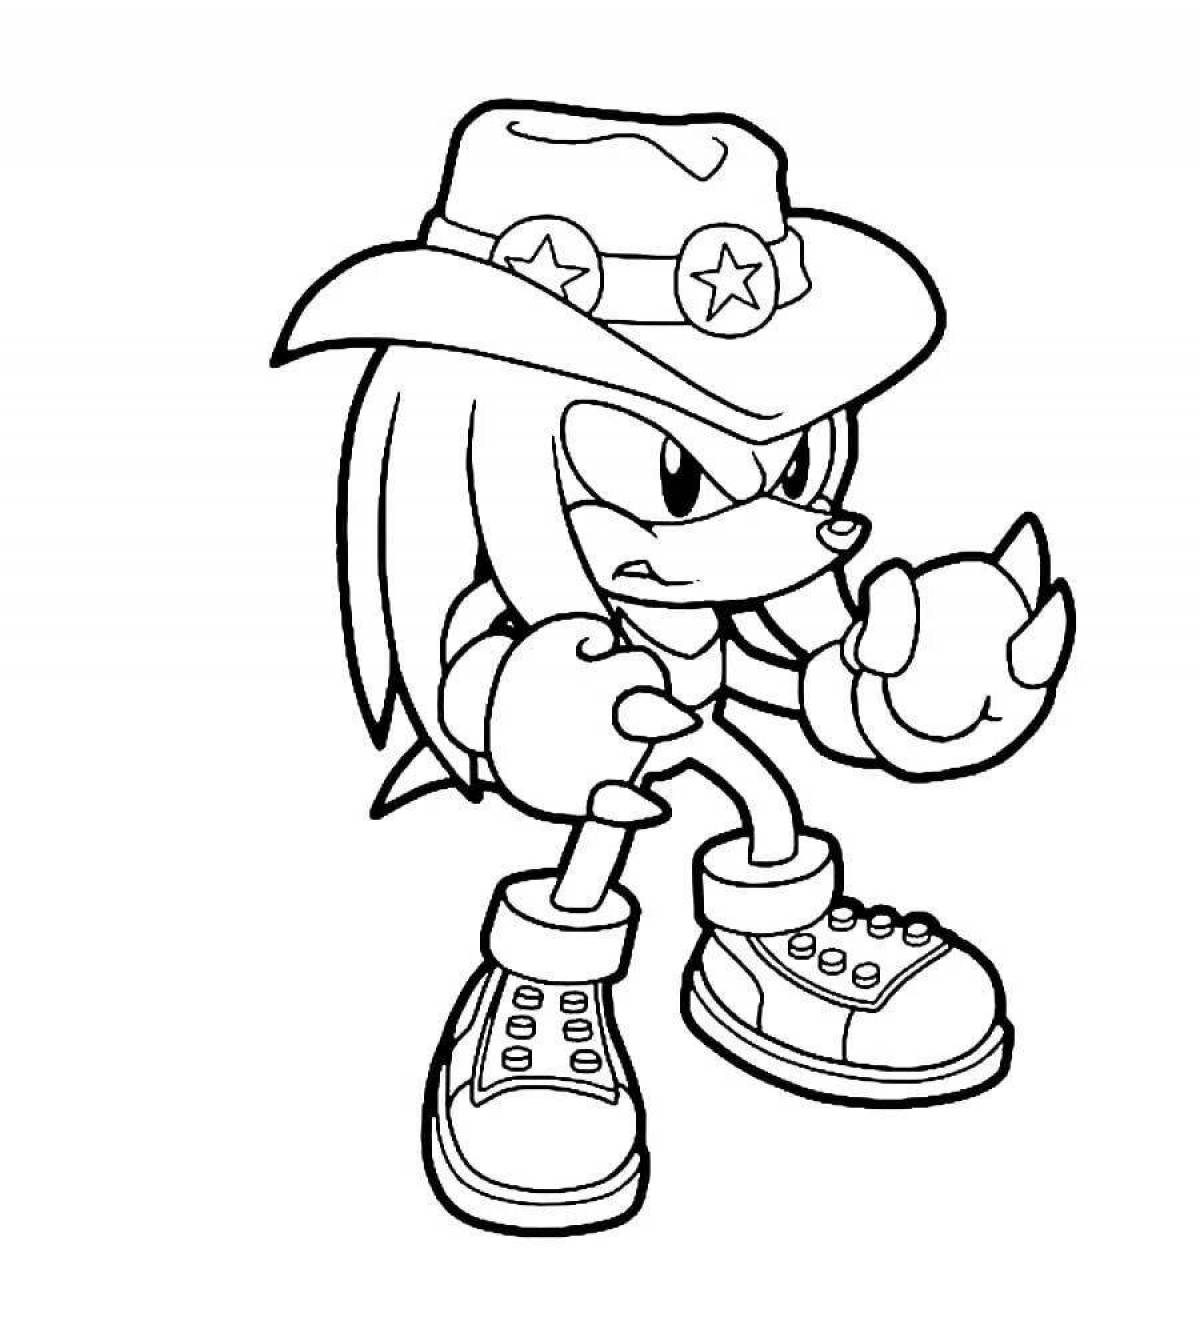 Fascinating sonic knuckles coloring book